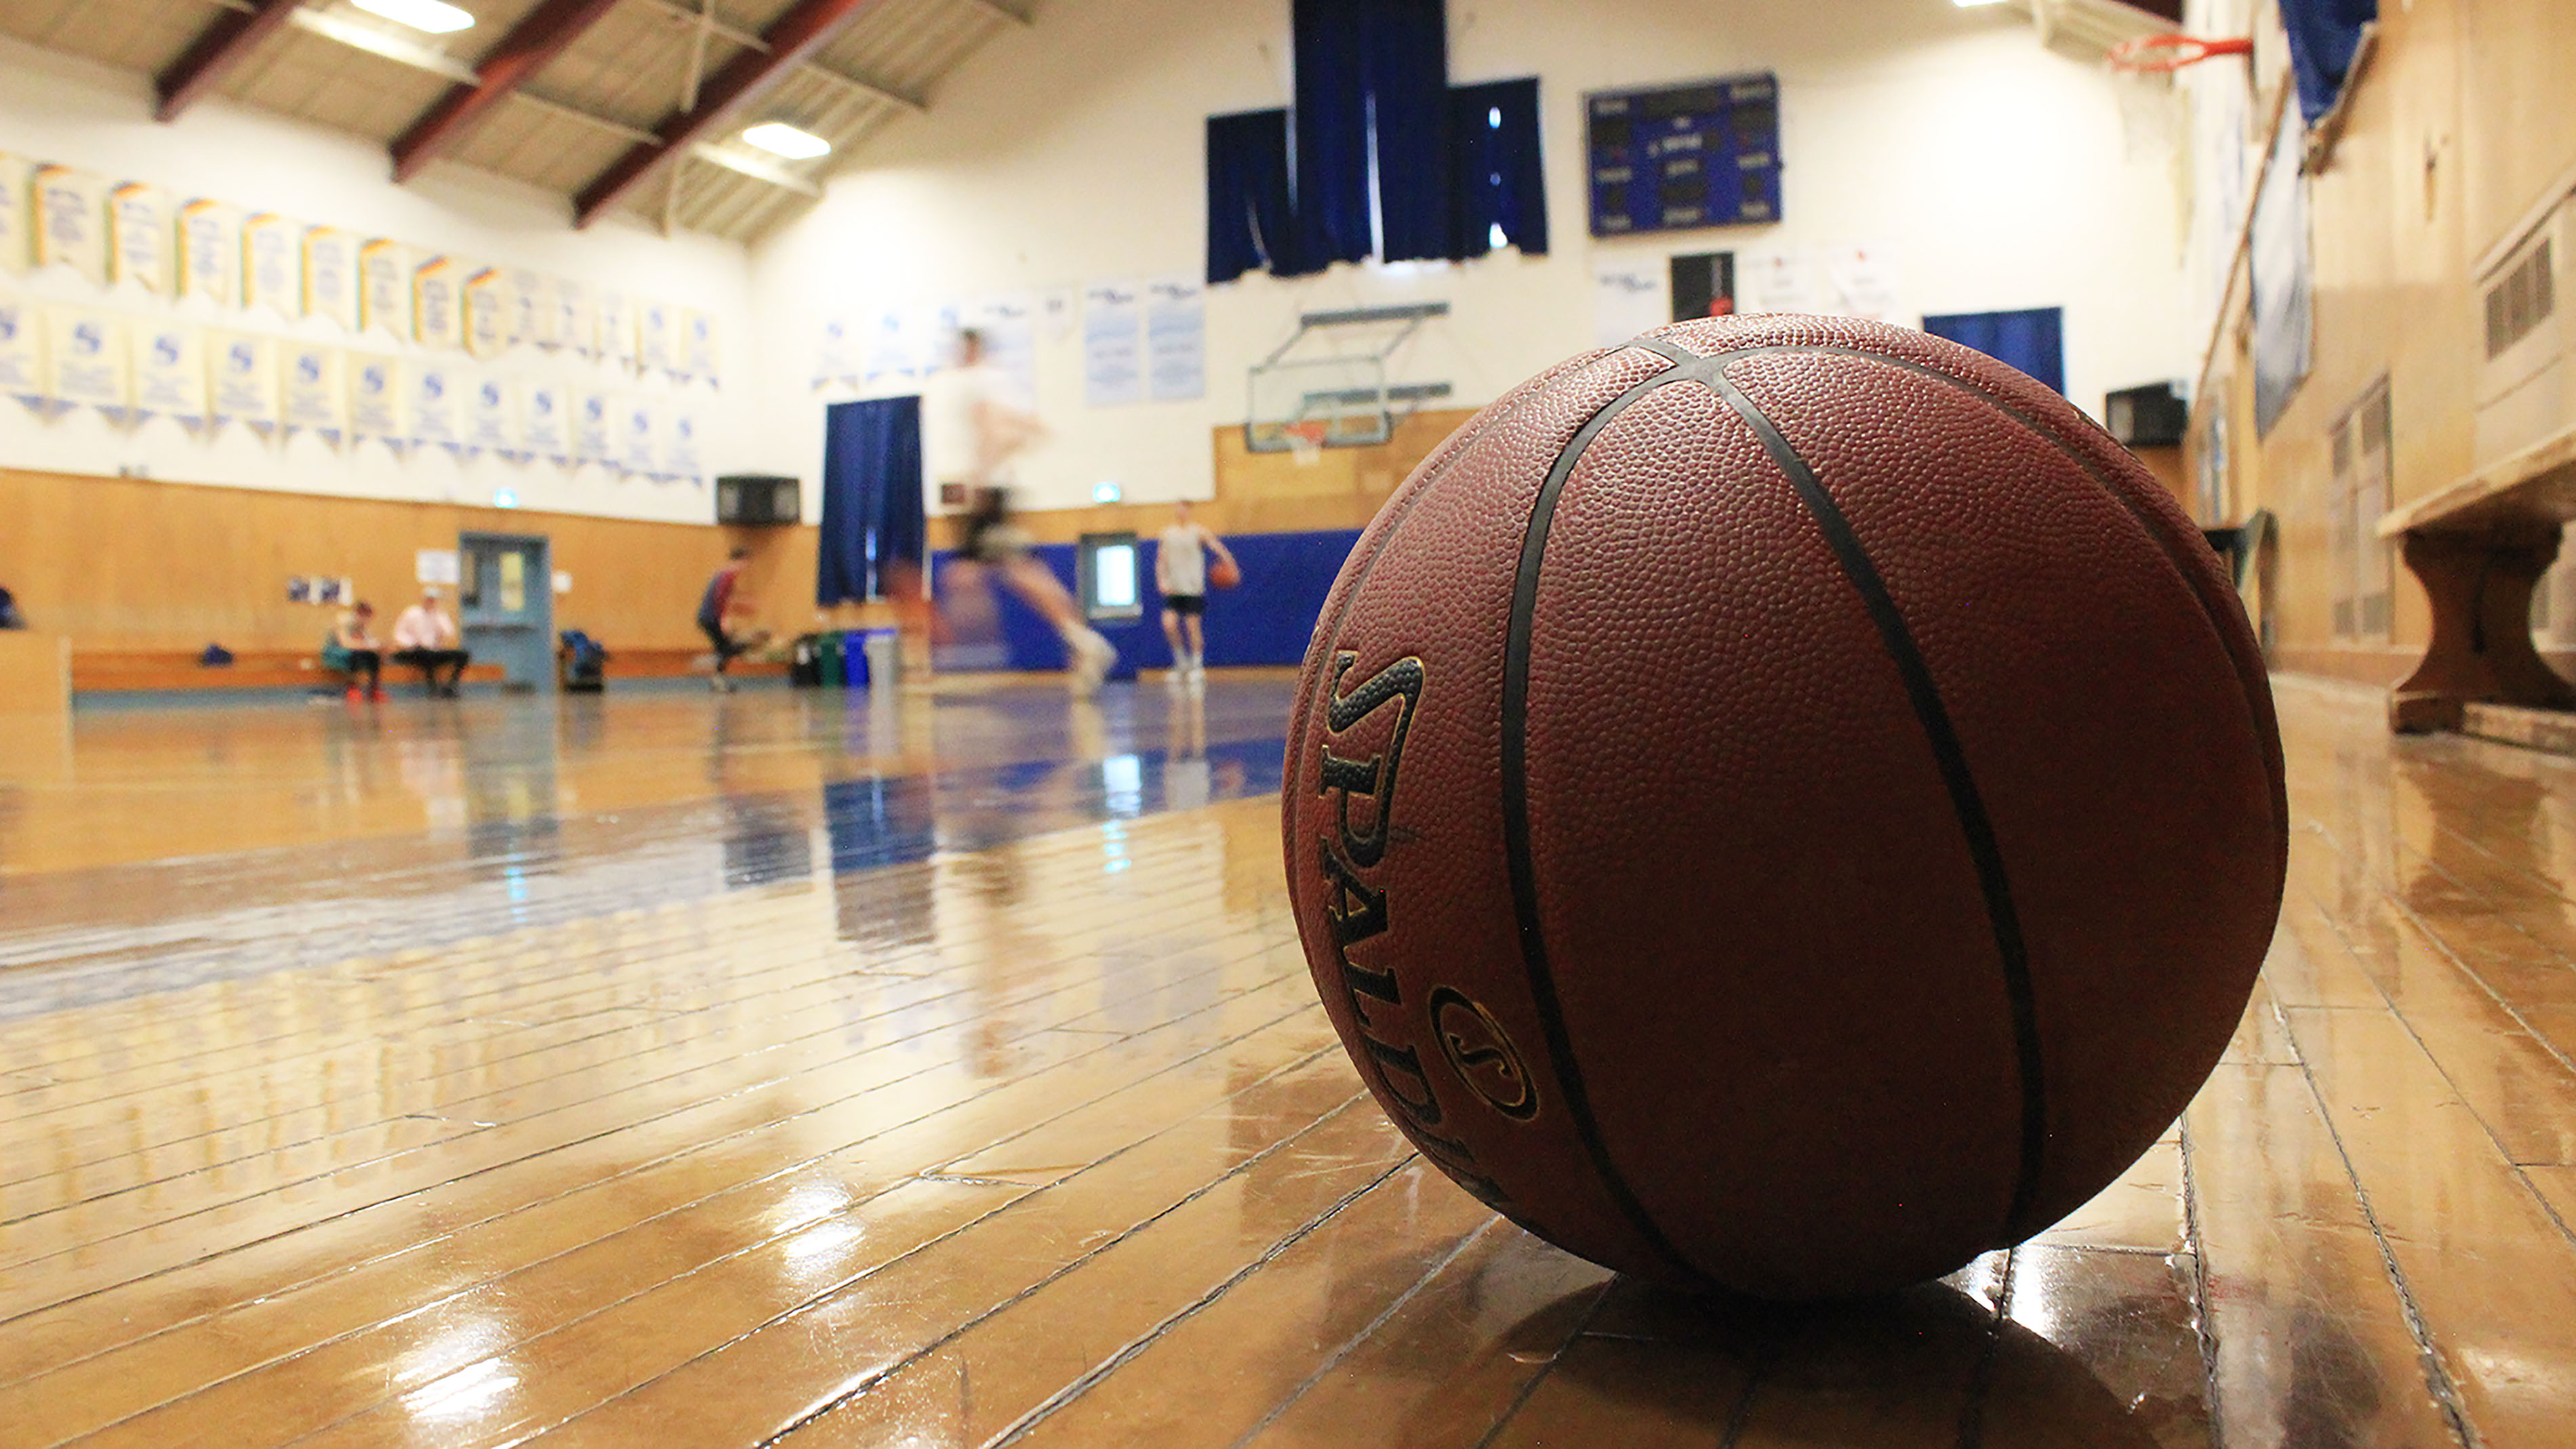 Coach background checks not always enforced in youth basketball | The Signal